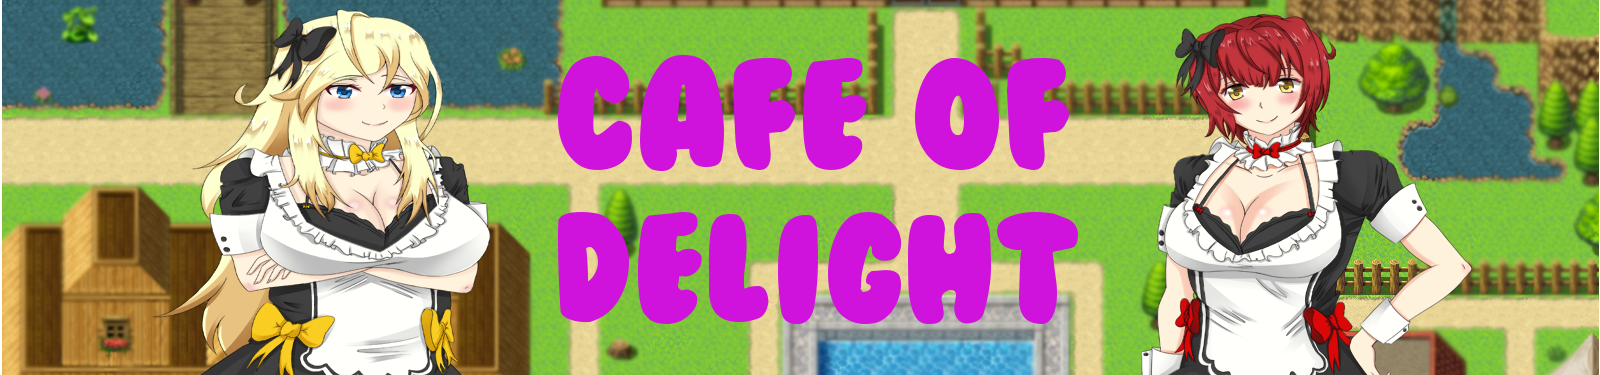 Cafe of Delight